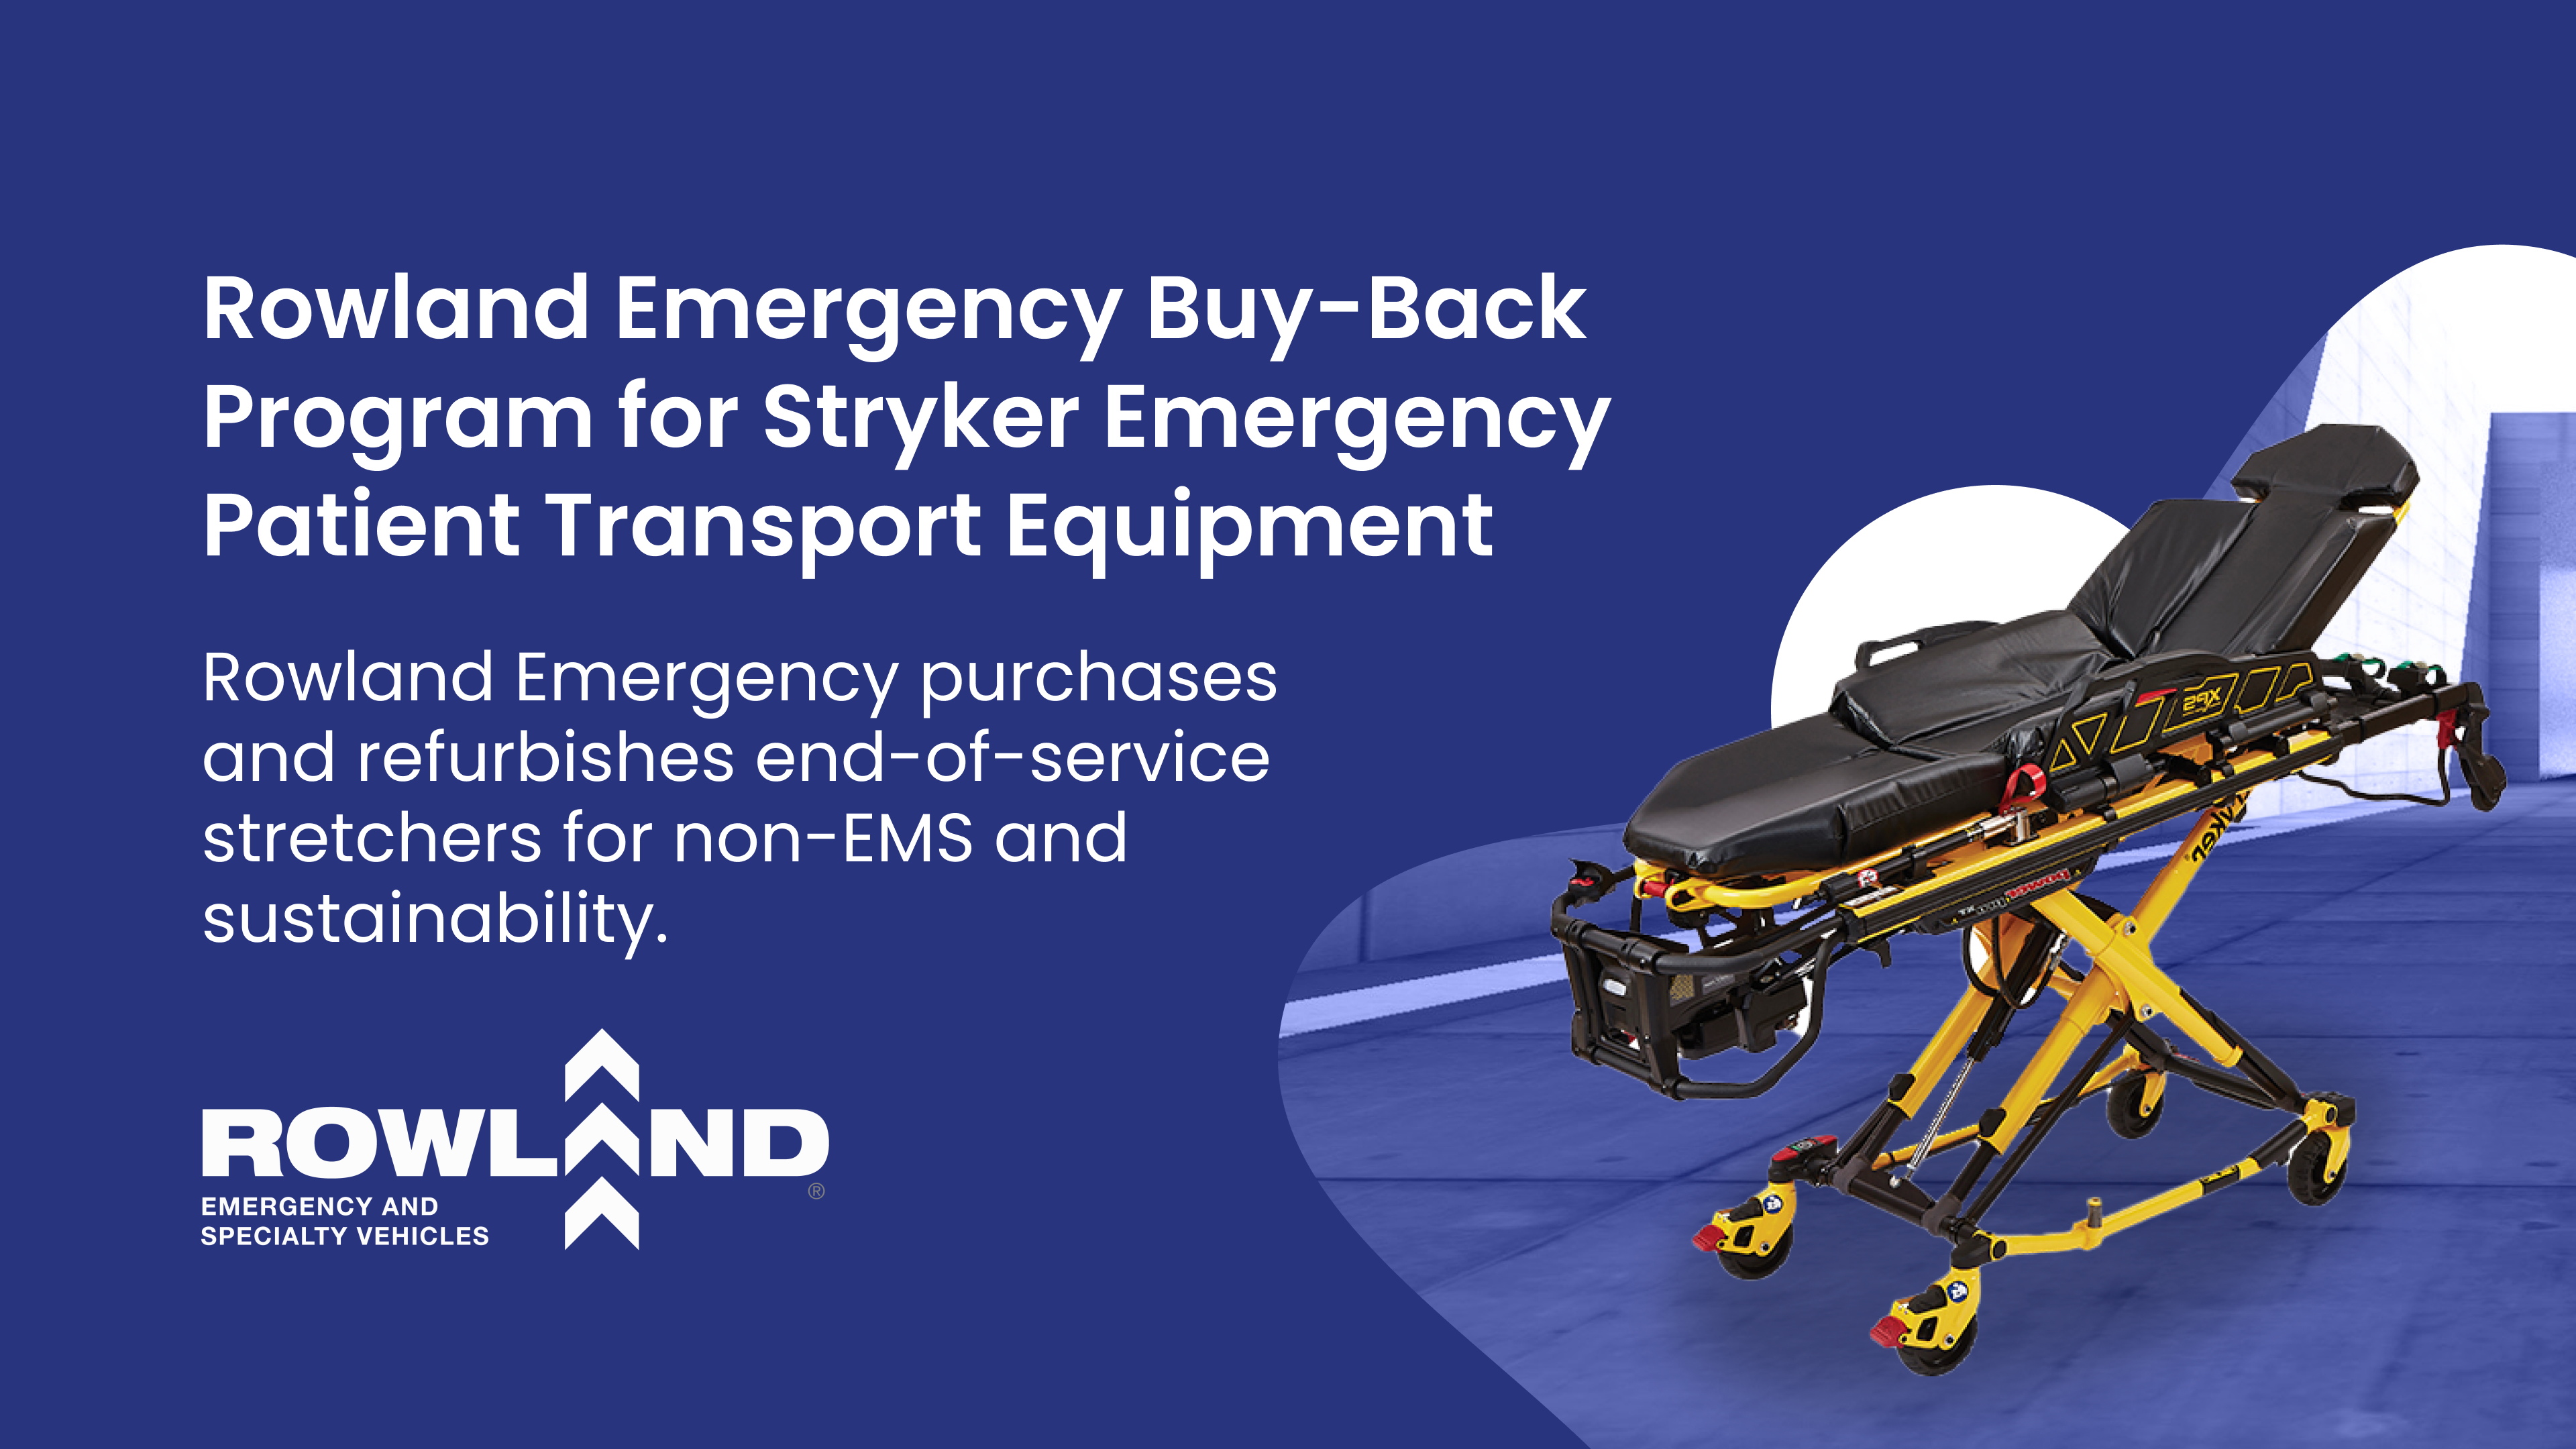 Load video: Refurbished Patient Transport Equipment by Rowland Emergency